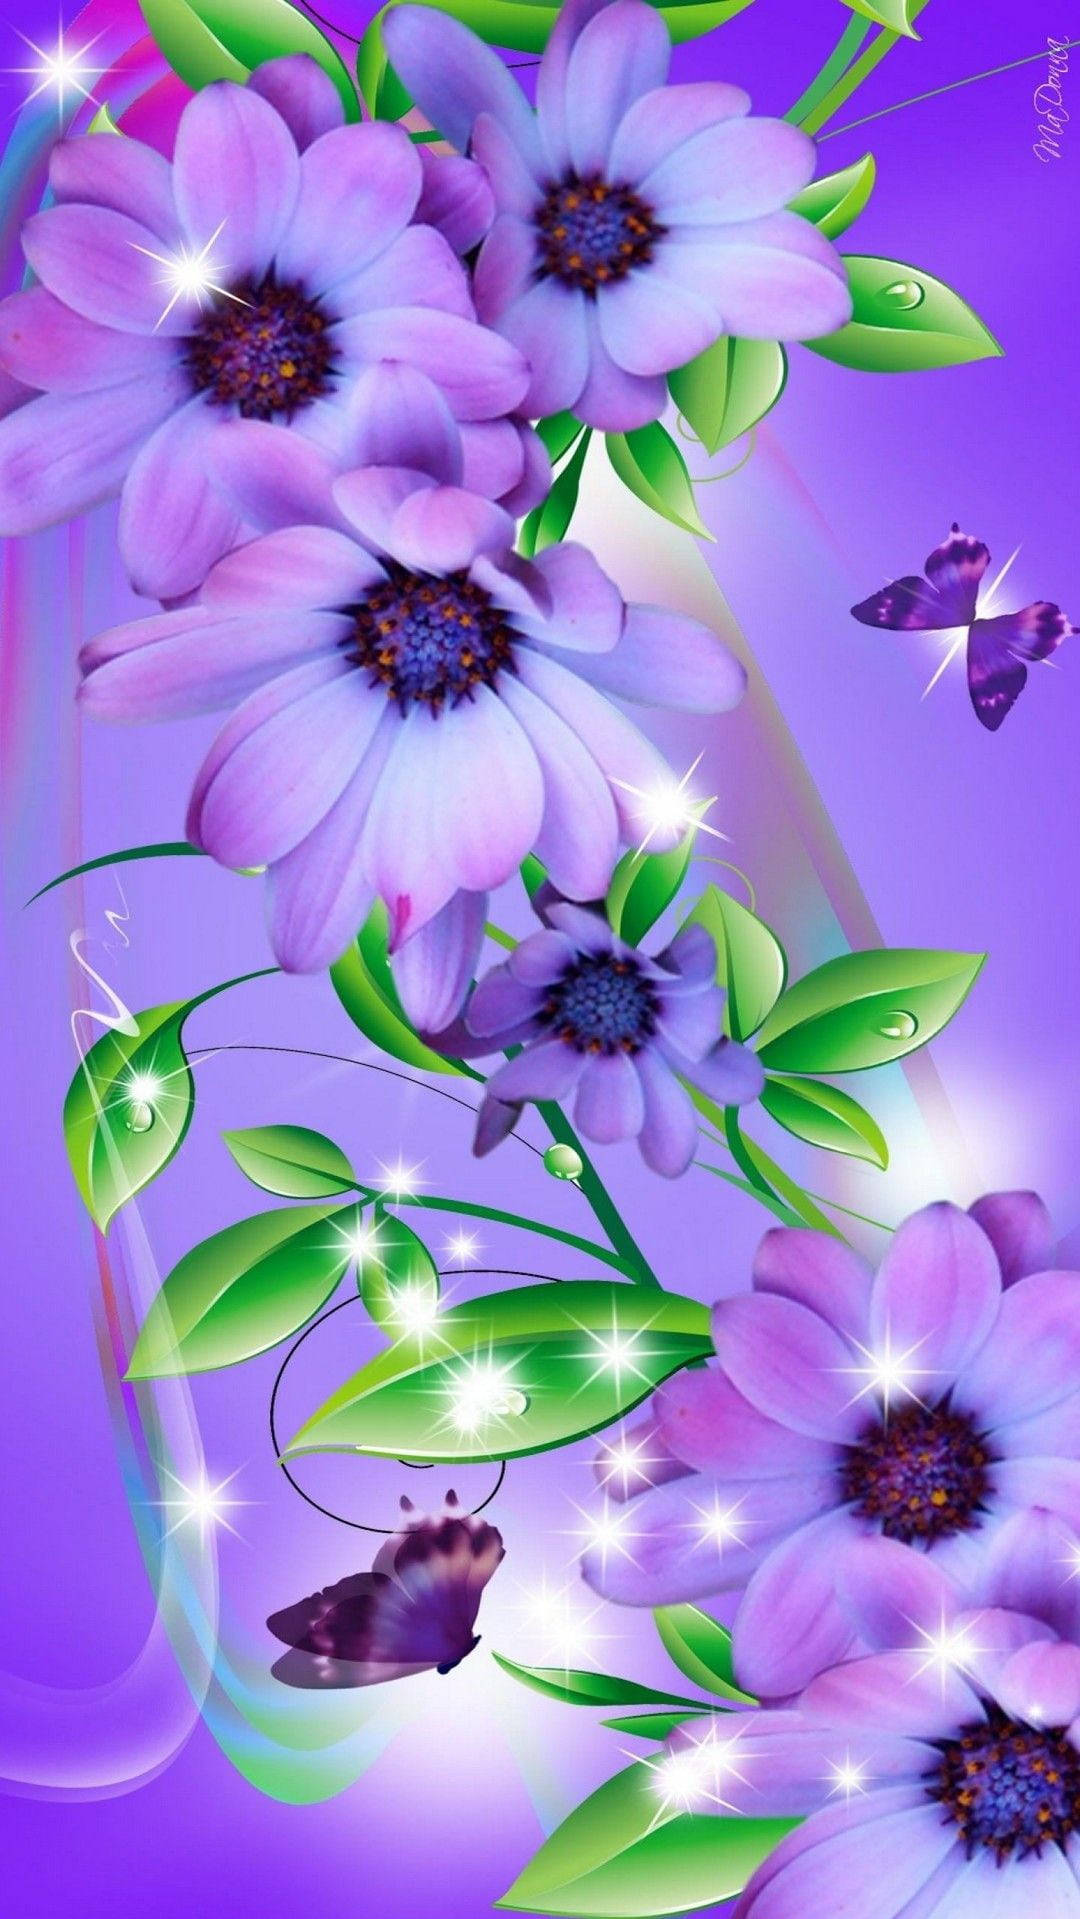 Sparkly Purple Daisies Flower Mobile